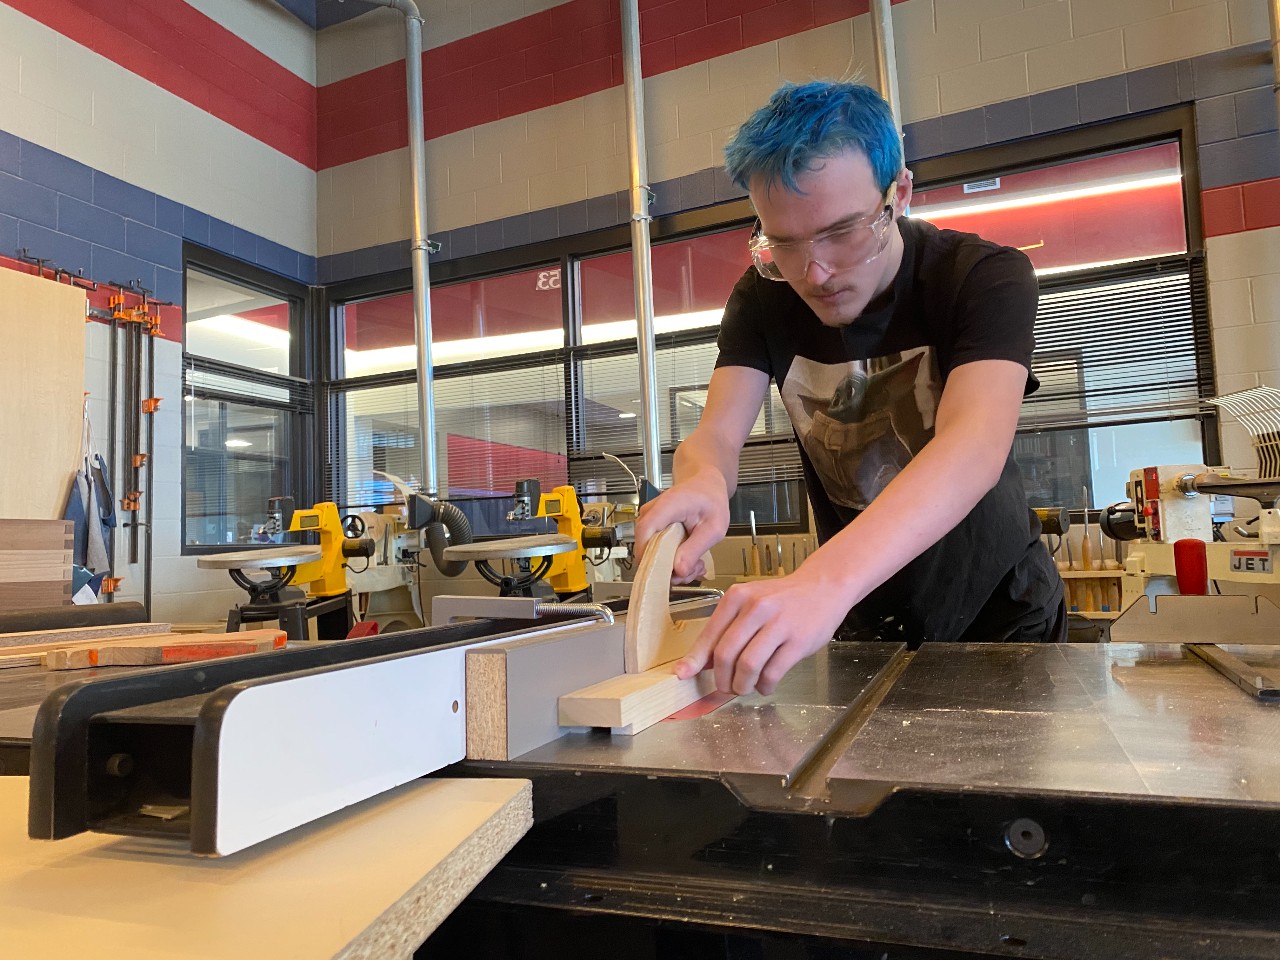 A Liberty High School students cuts wood using a commercial saw in a Career and Technical Education class